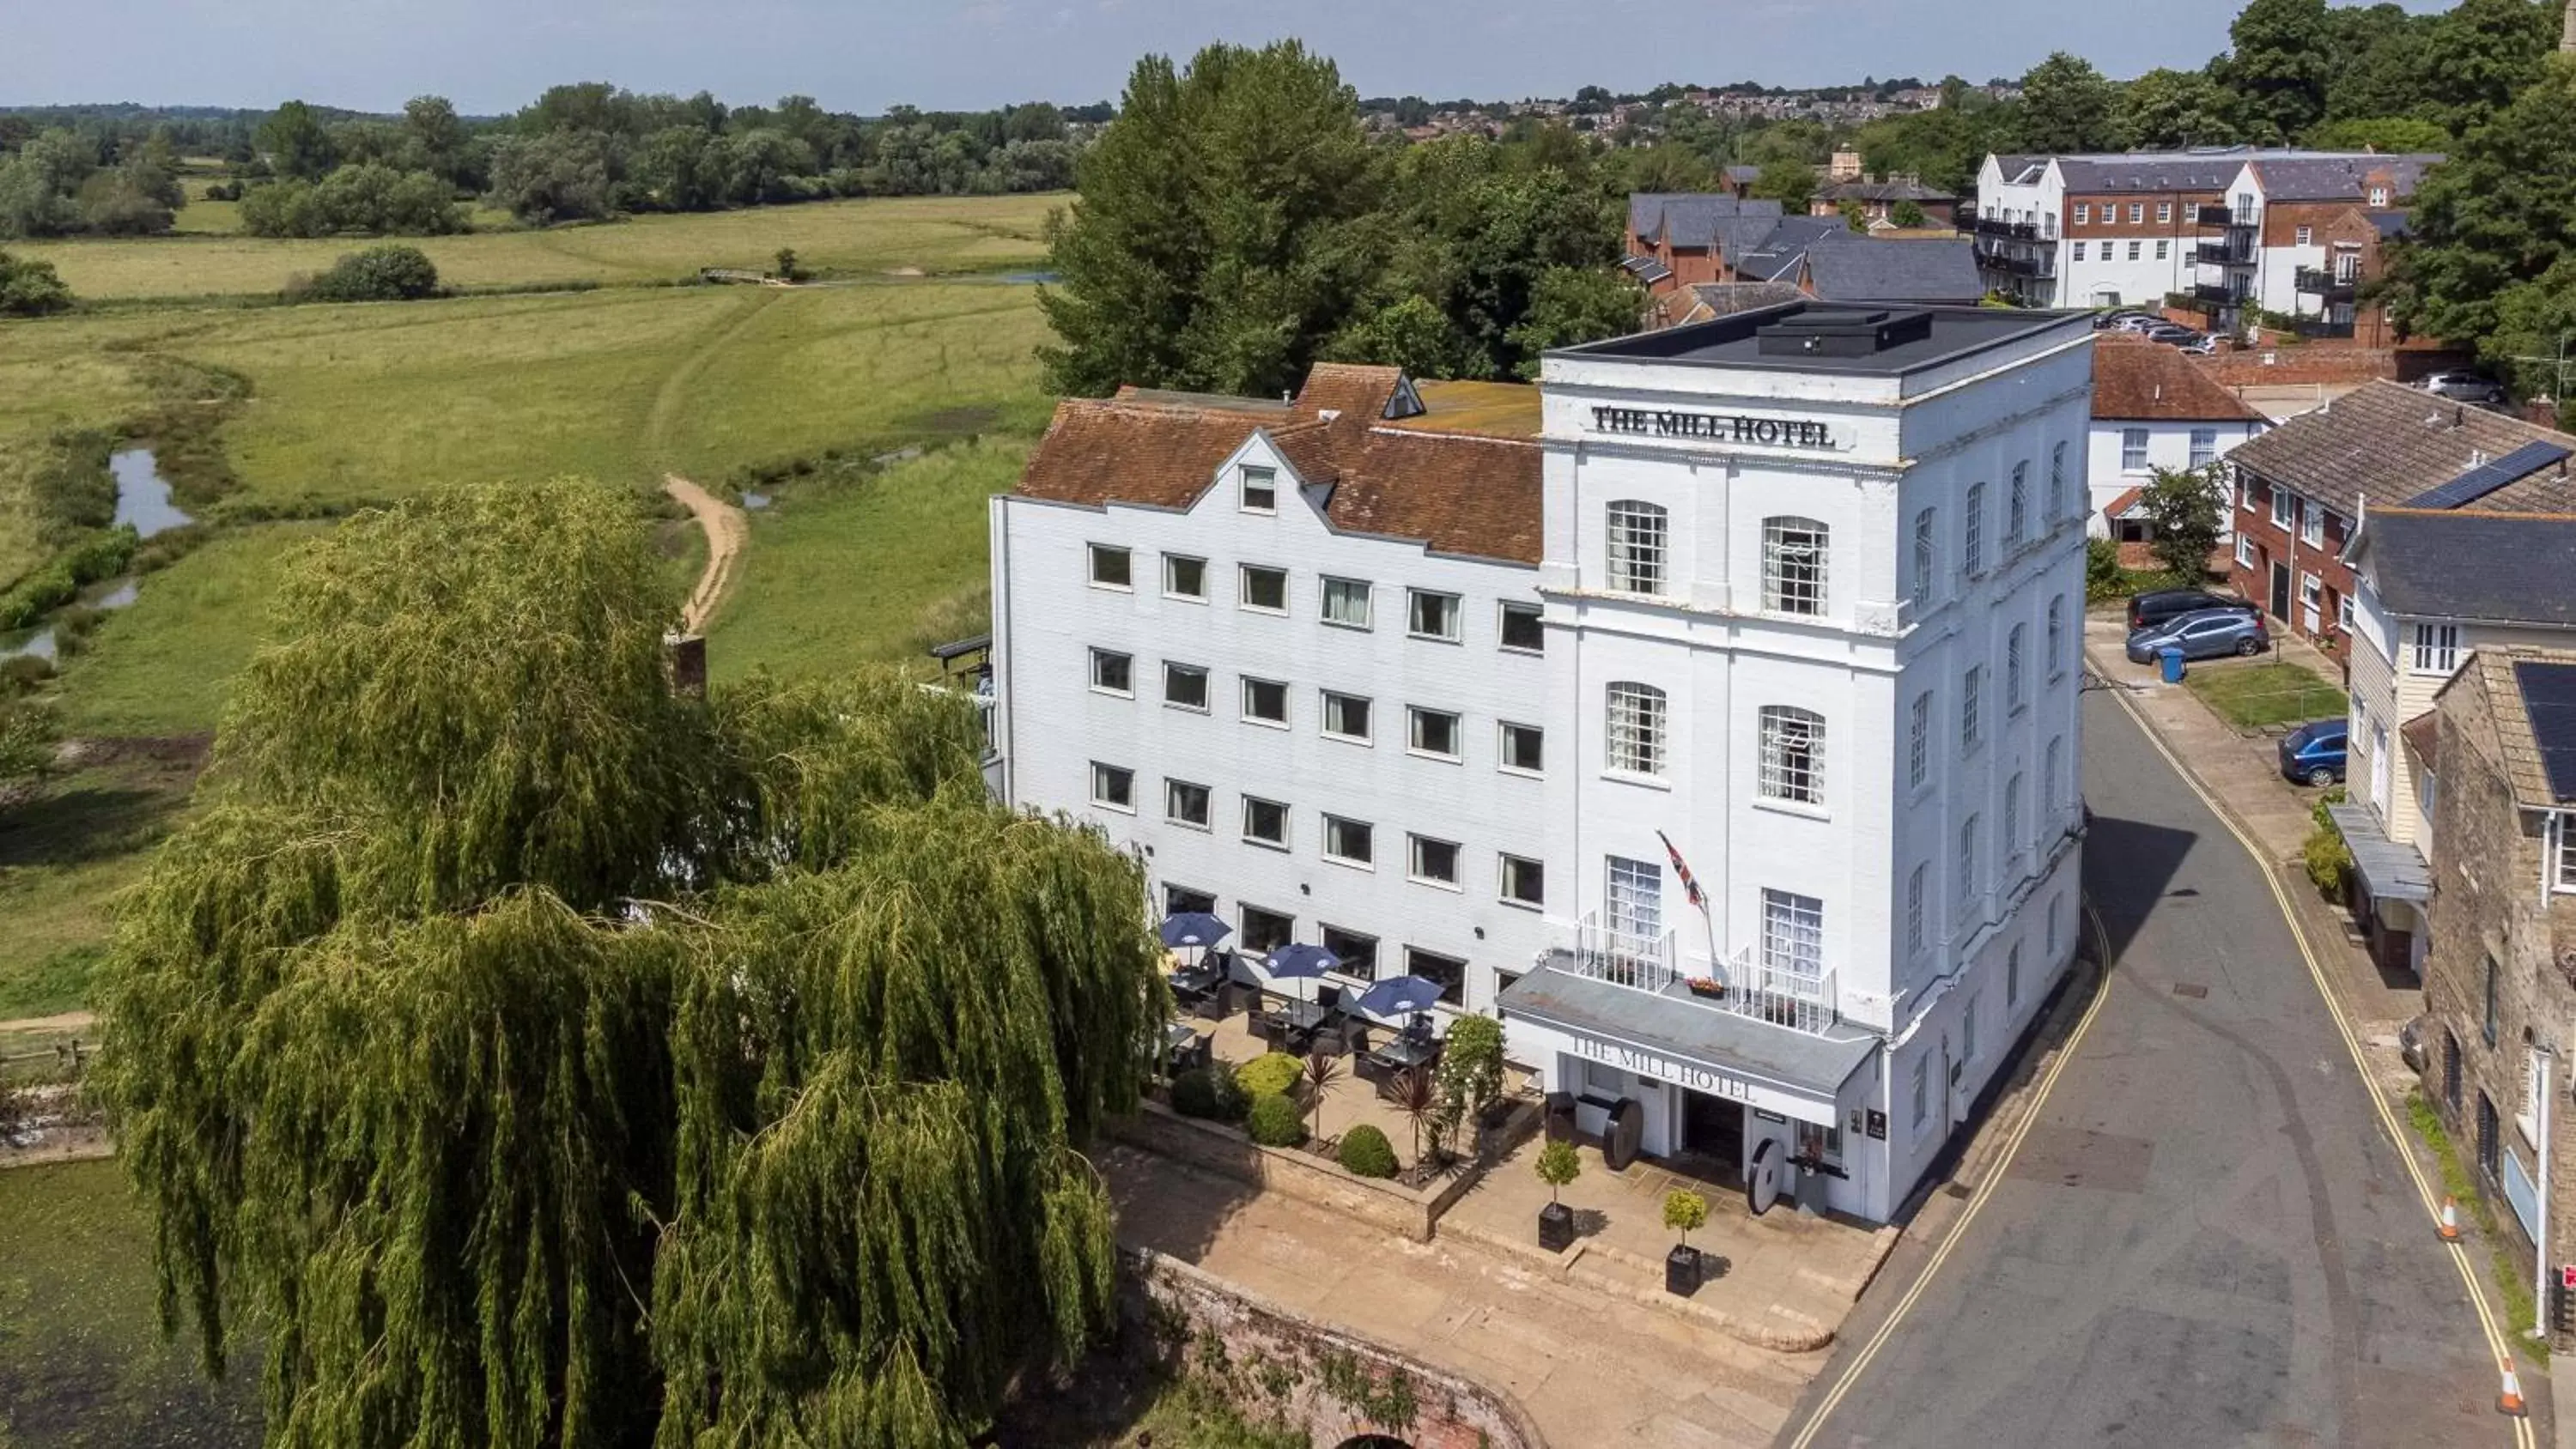 Property building, Bird's-eye View in The Mill Hotel